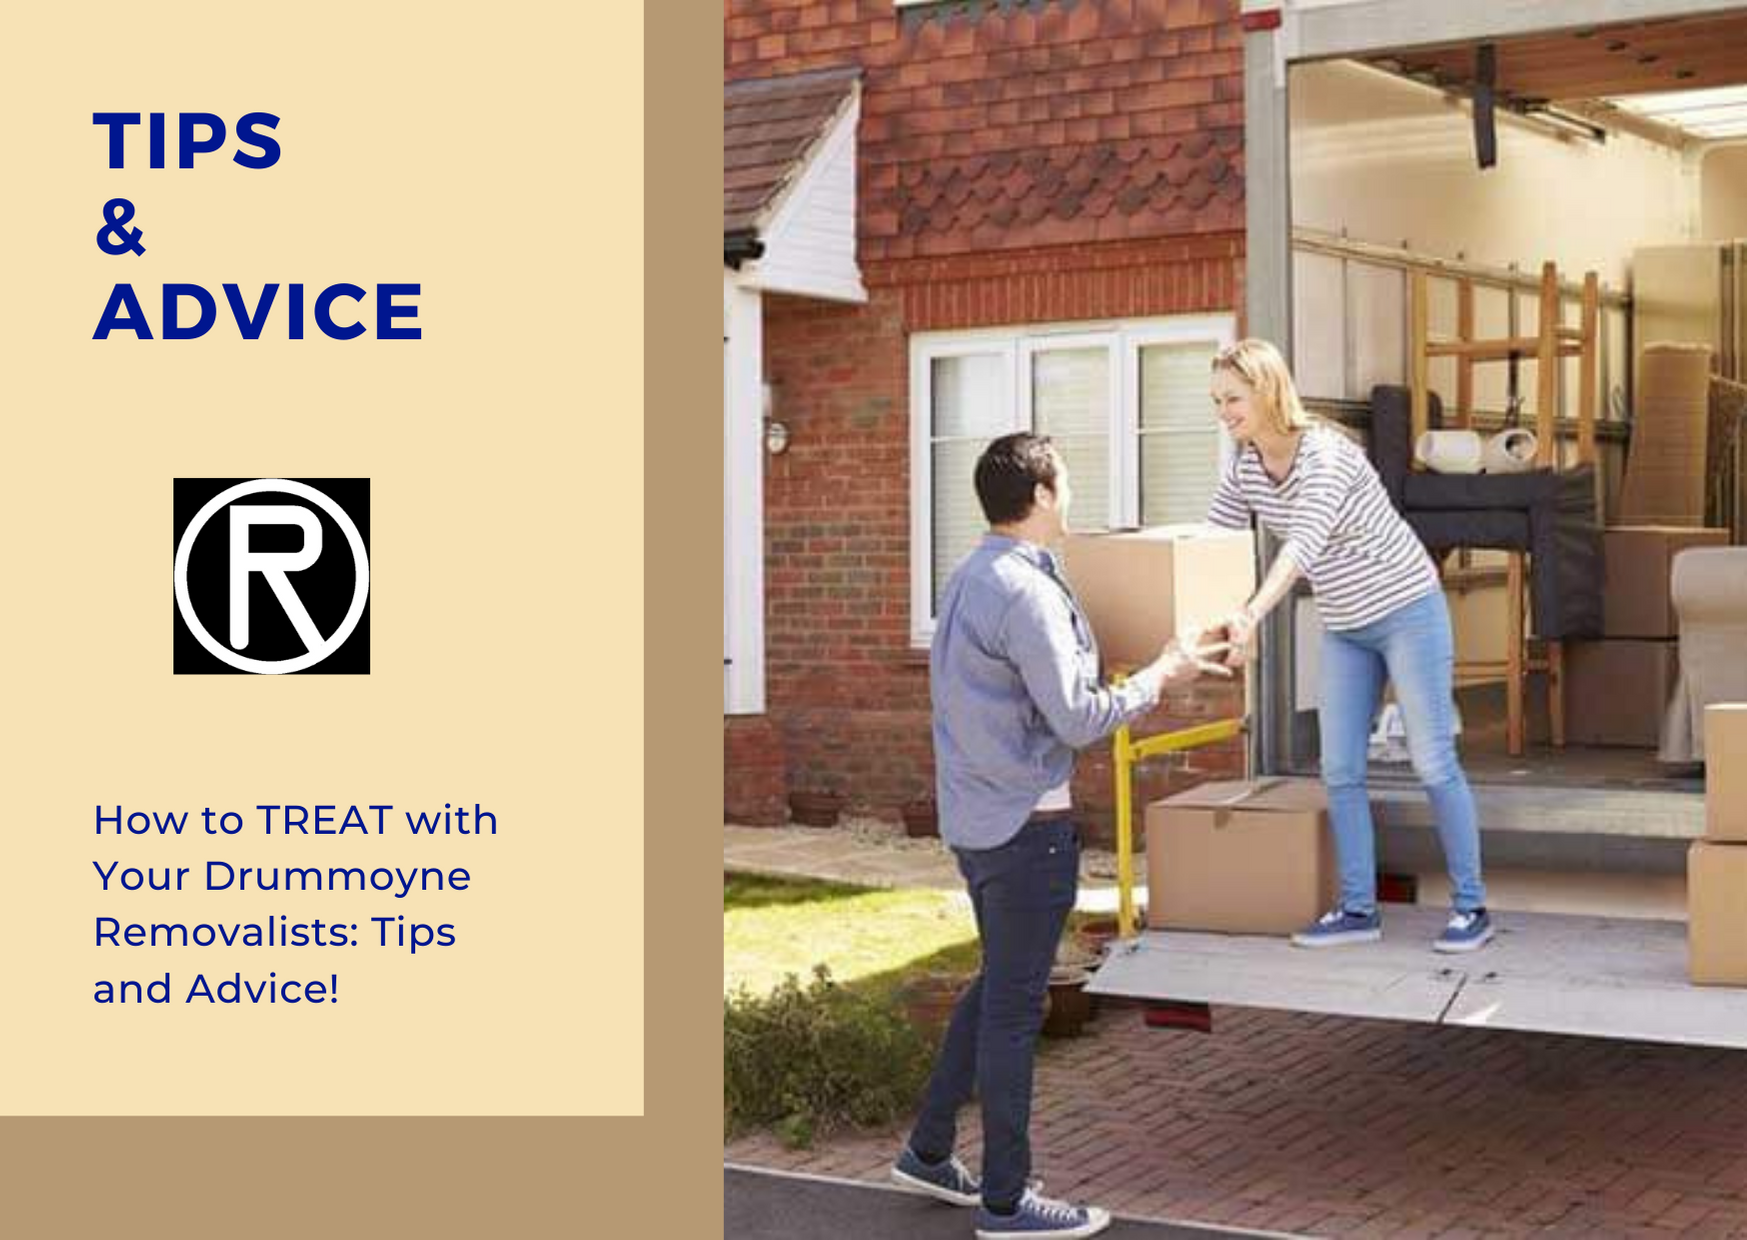 Removalists tips